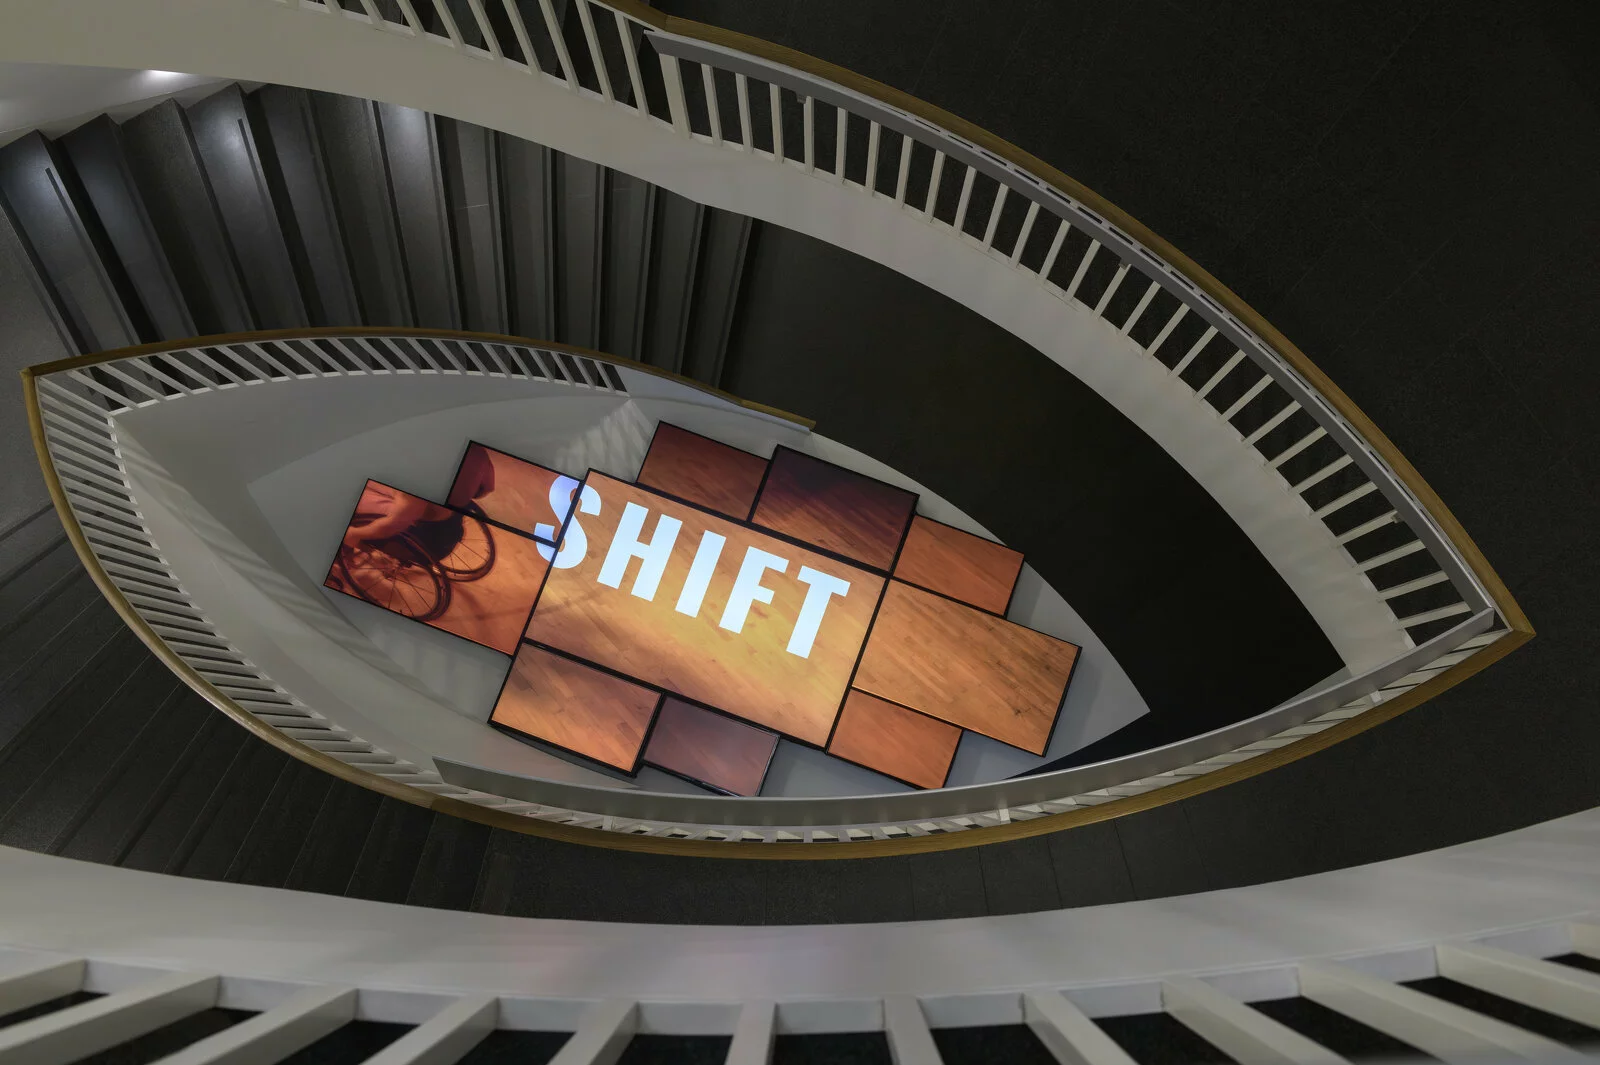 View from the MCA staircase looking down on ten screens in a tight arrangement that together display the word Shift against a peach background.